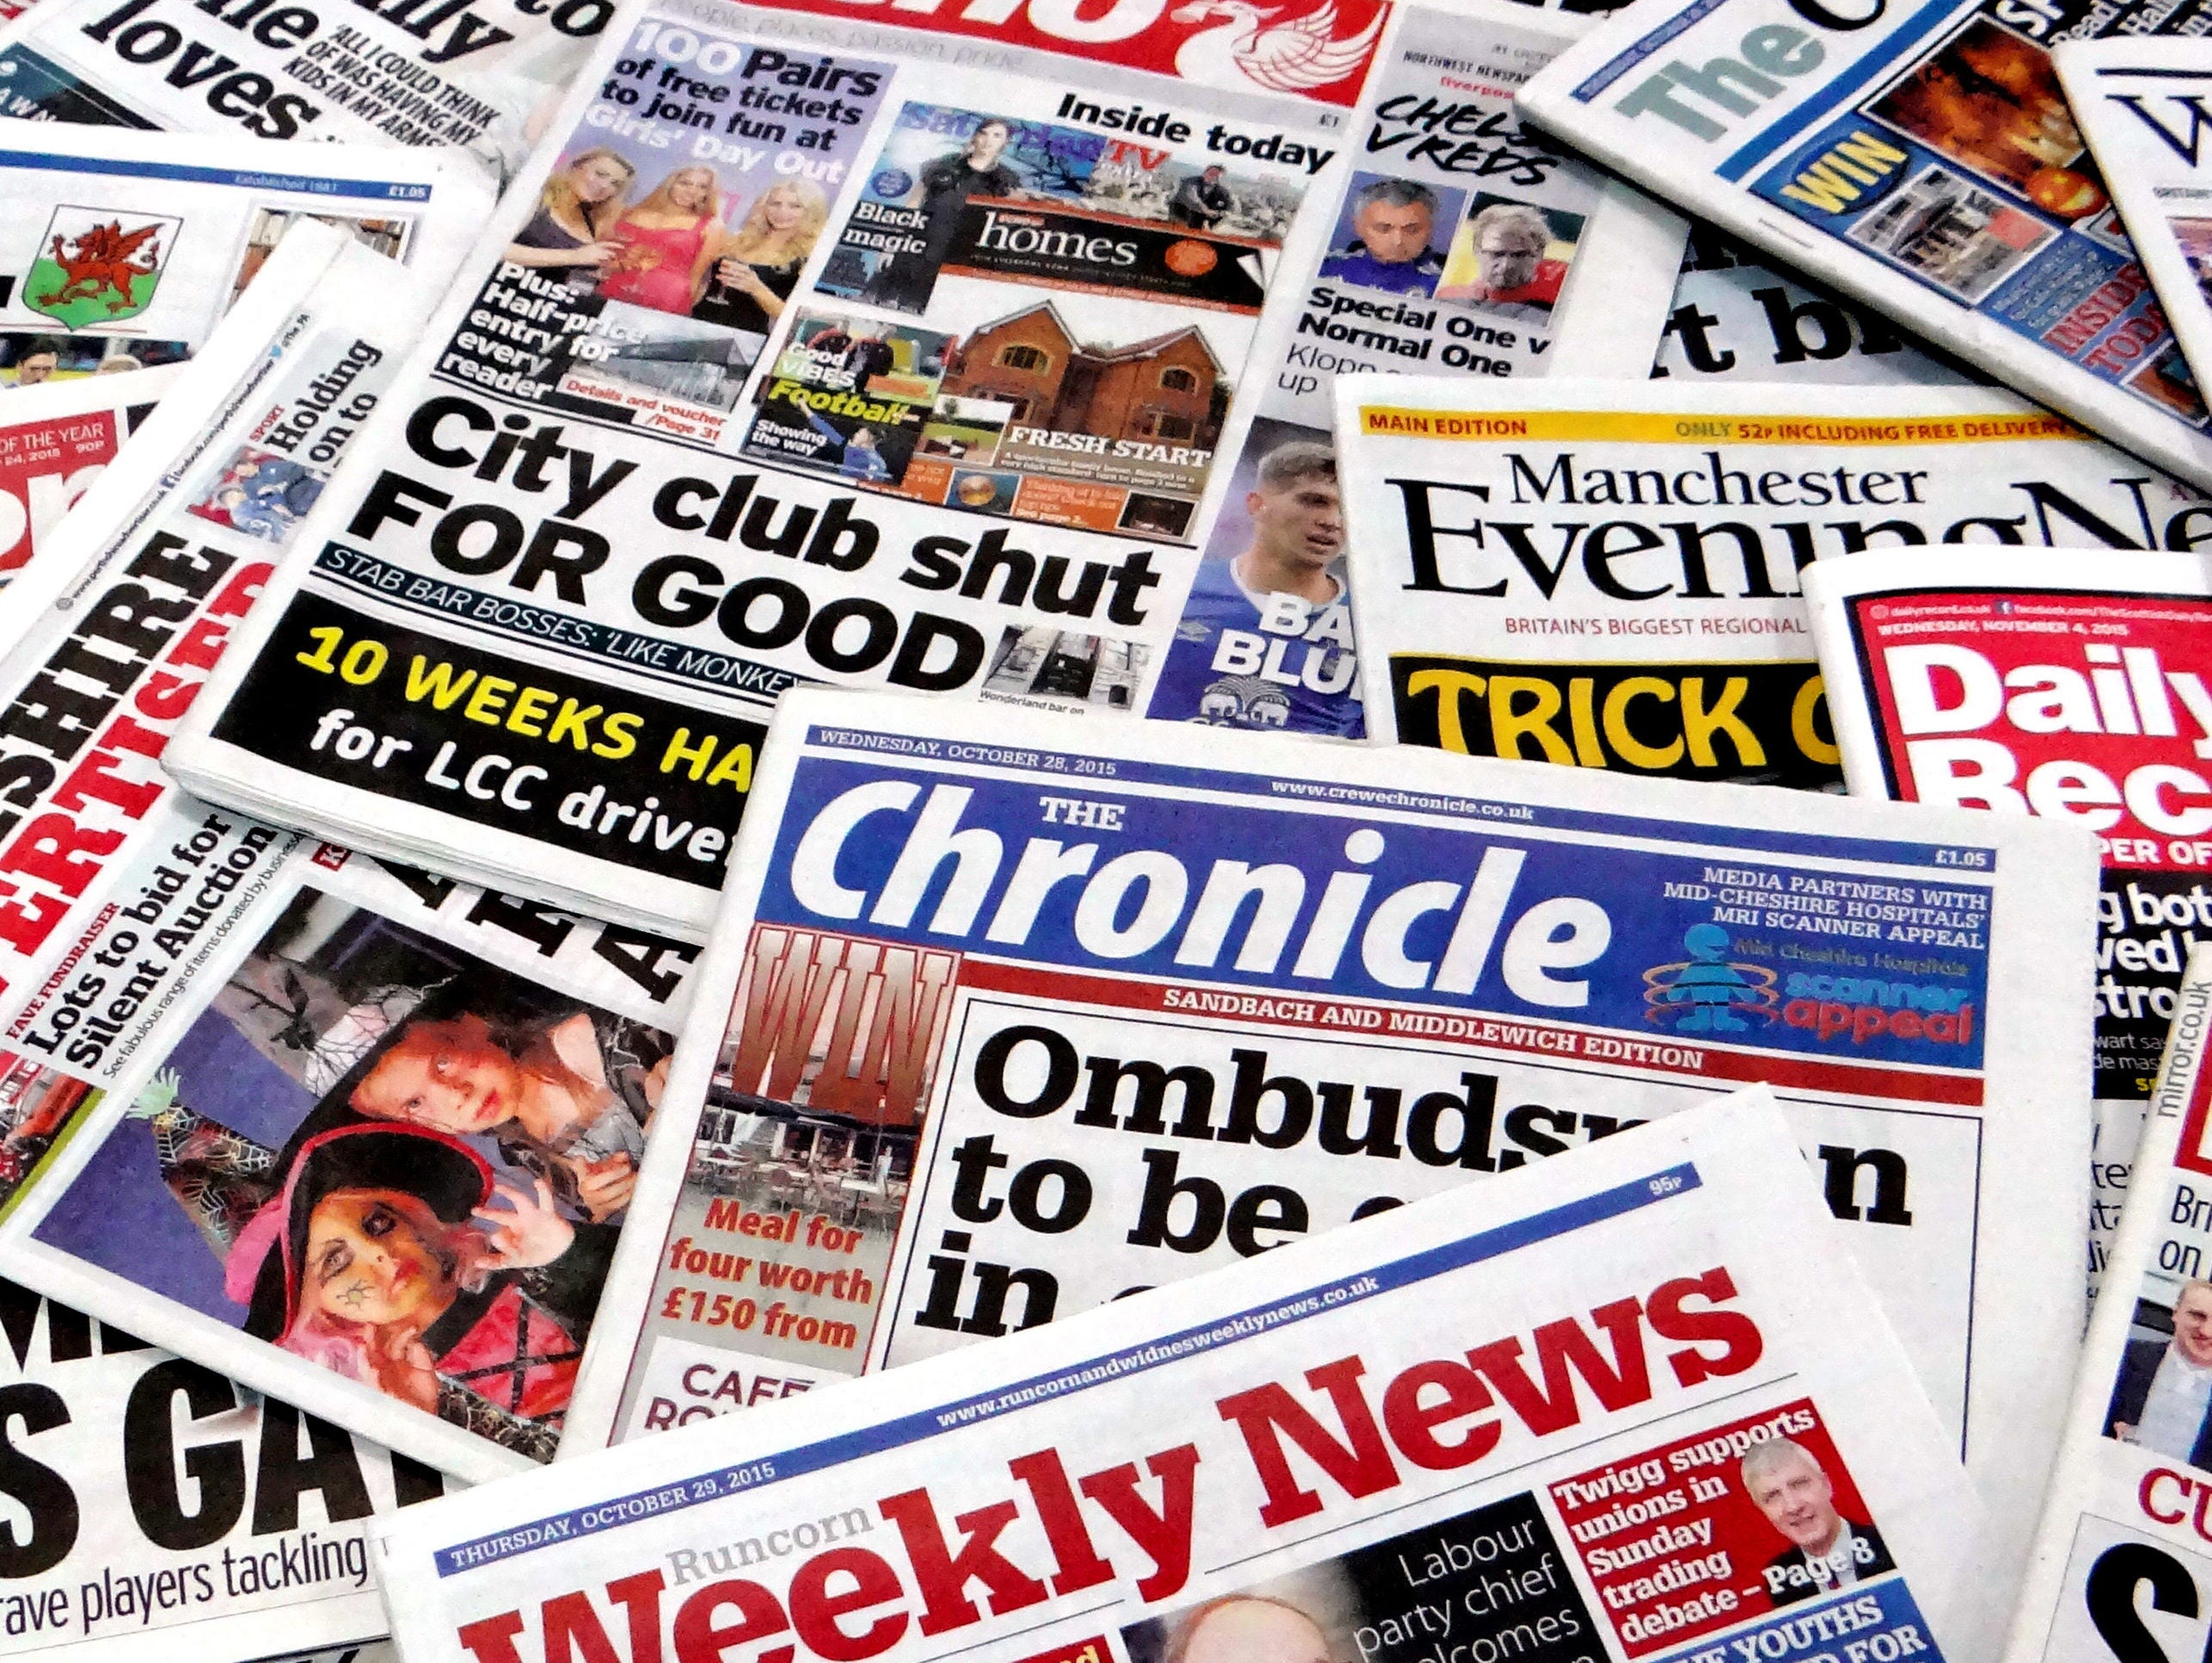 Journalists on Local World titles face pay and benefits 'discrimination' despite 'One Trinity Mirror' policy